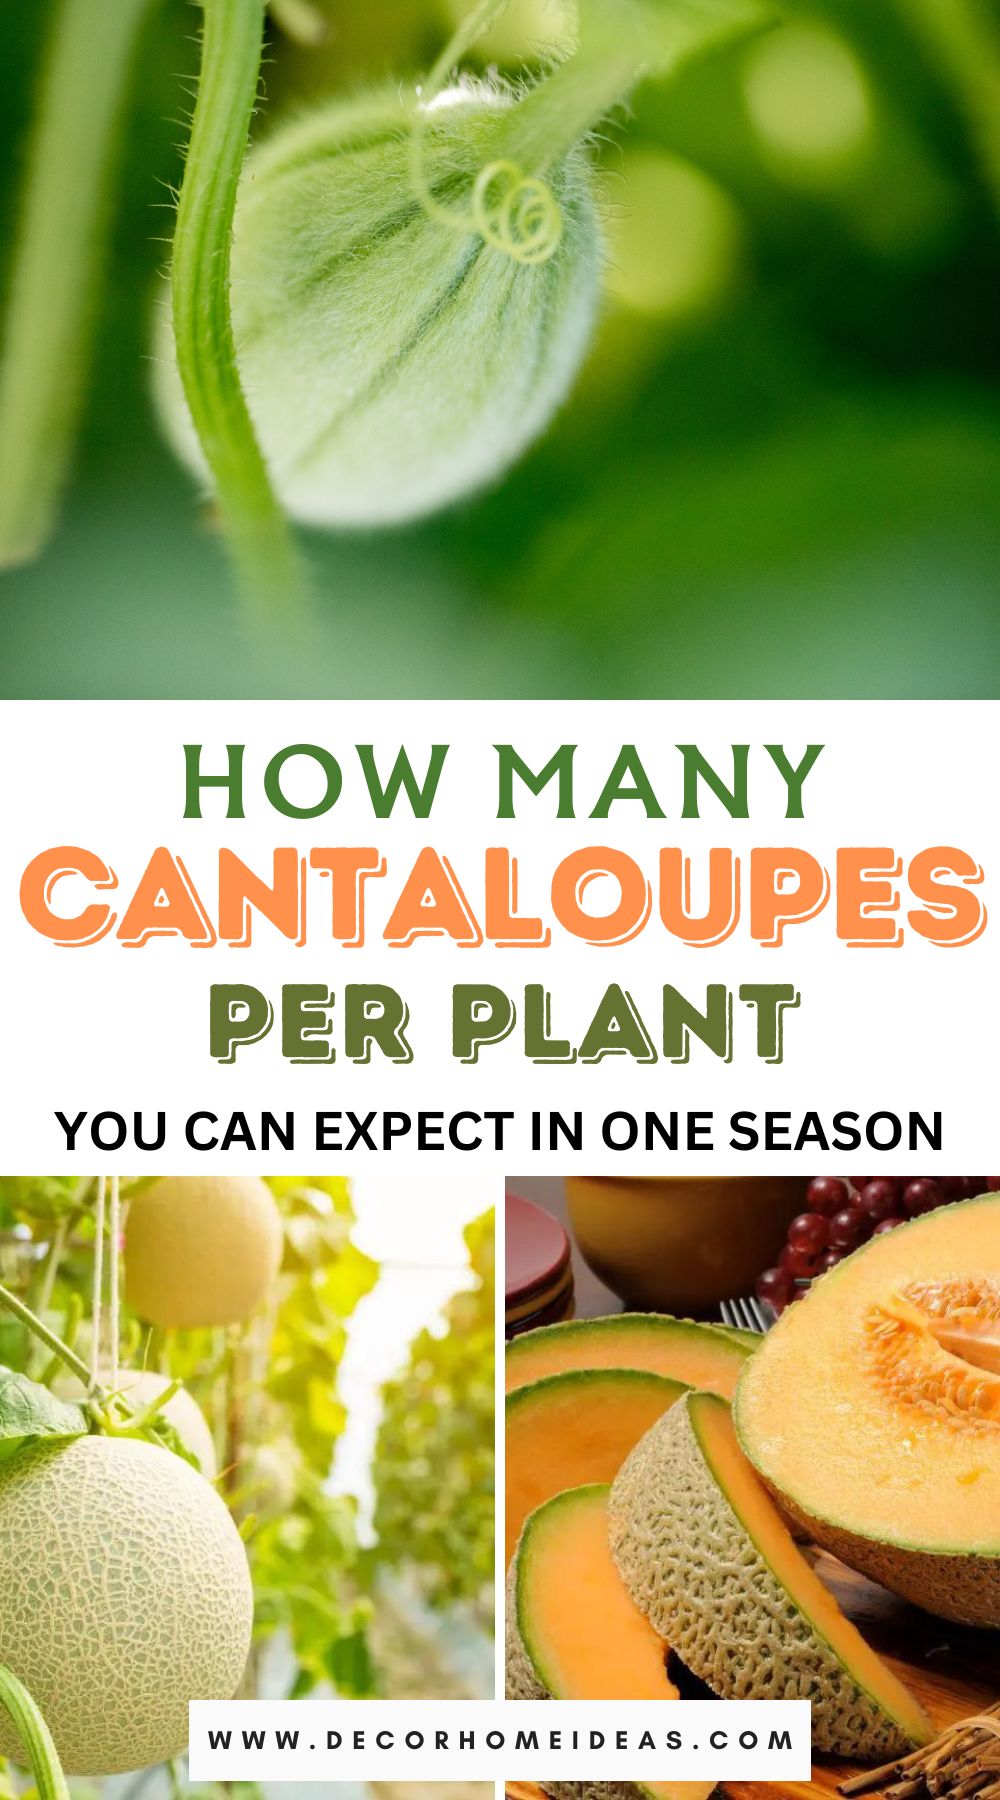 The cantaloupe's bounty revealed! Learn how many delicious cantaloupes you can expect from a single plant in just one growing season.